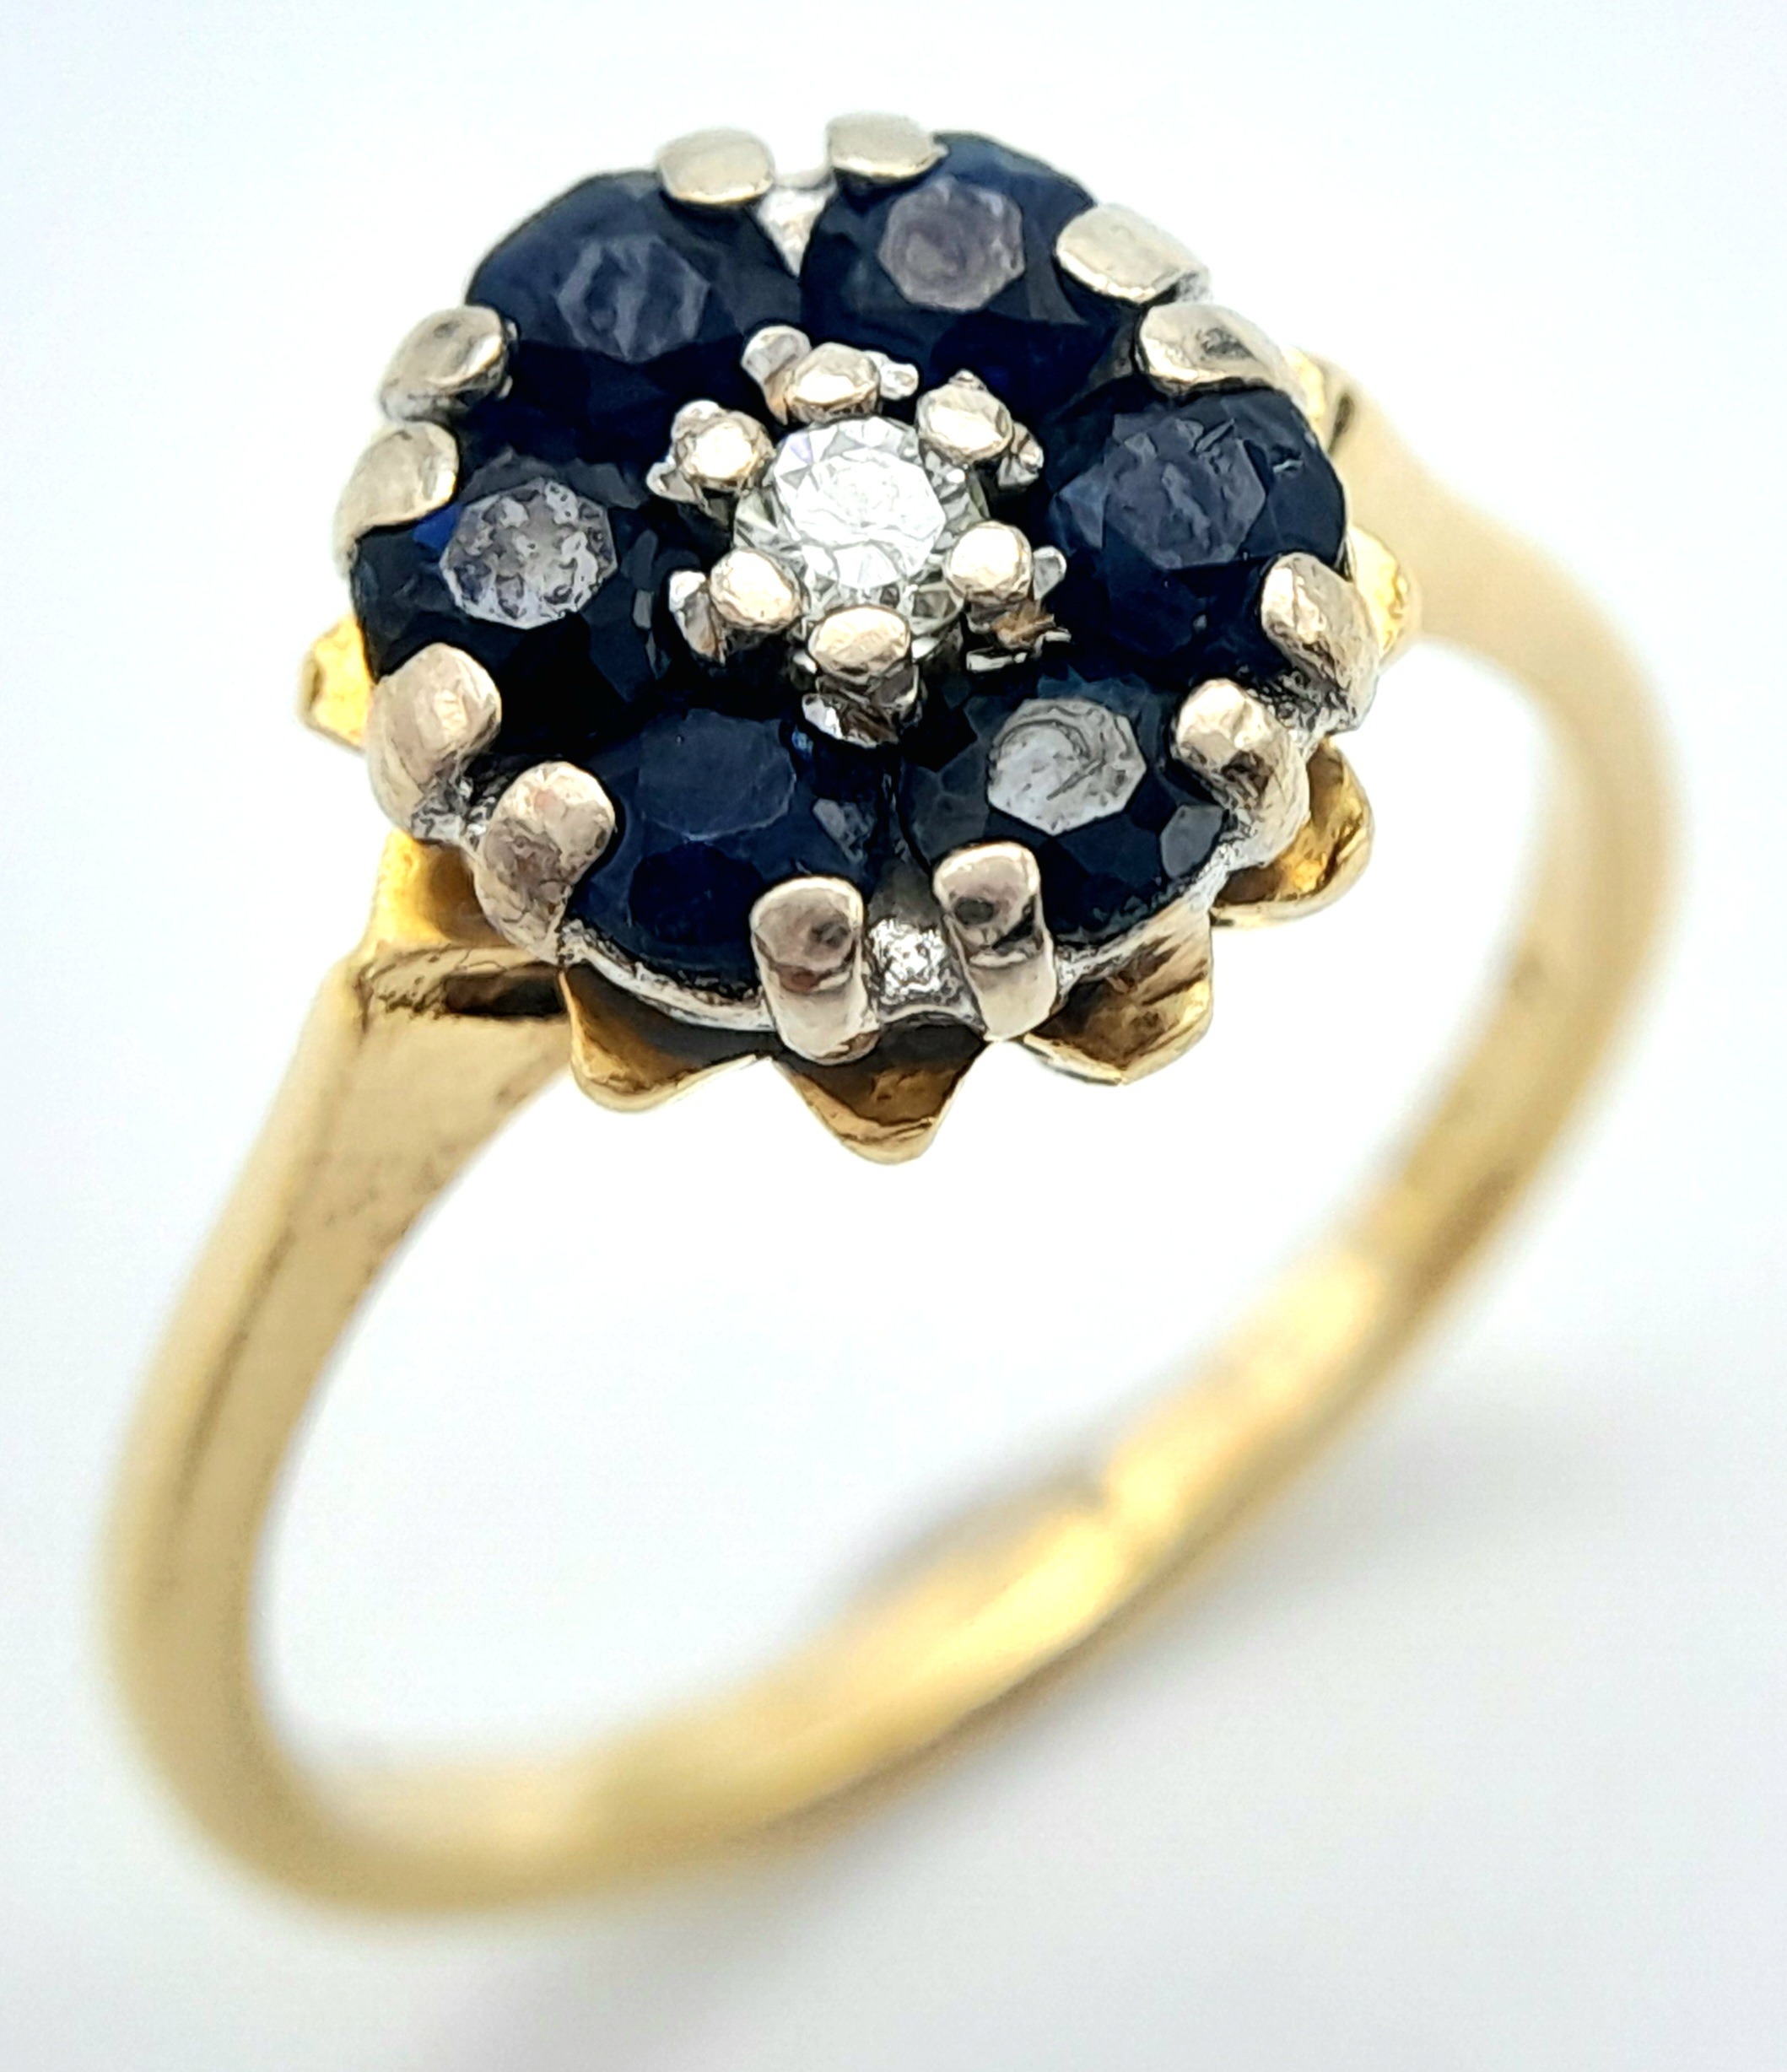 AN 18K YELLOW GOLD VINTAGE DIAMOND & SAPPHIRE RING. Size K, 3.5g total weight. Ref: SC 8070 - Image 4 of 6